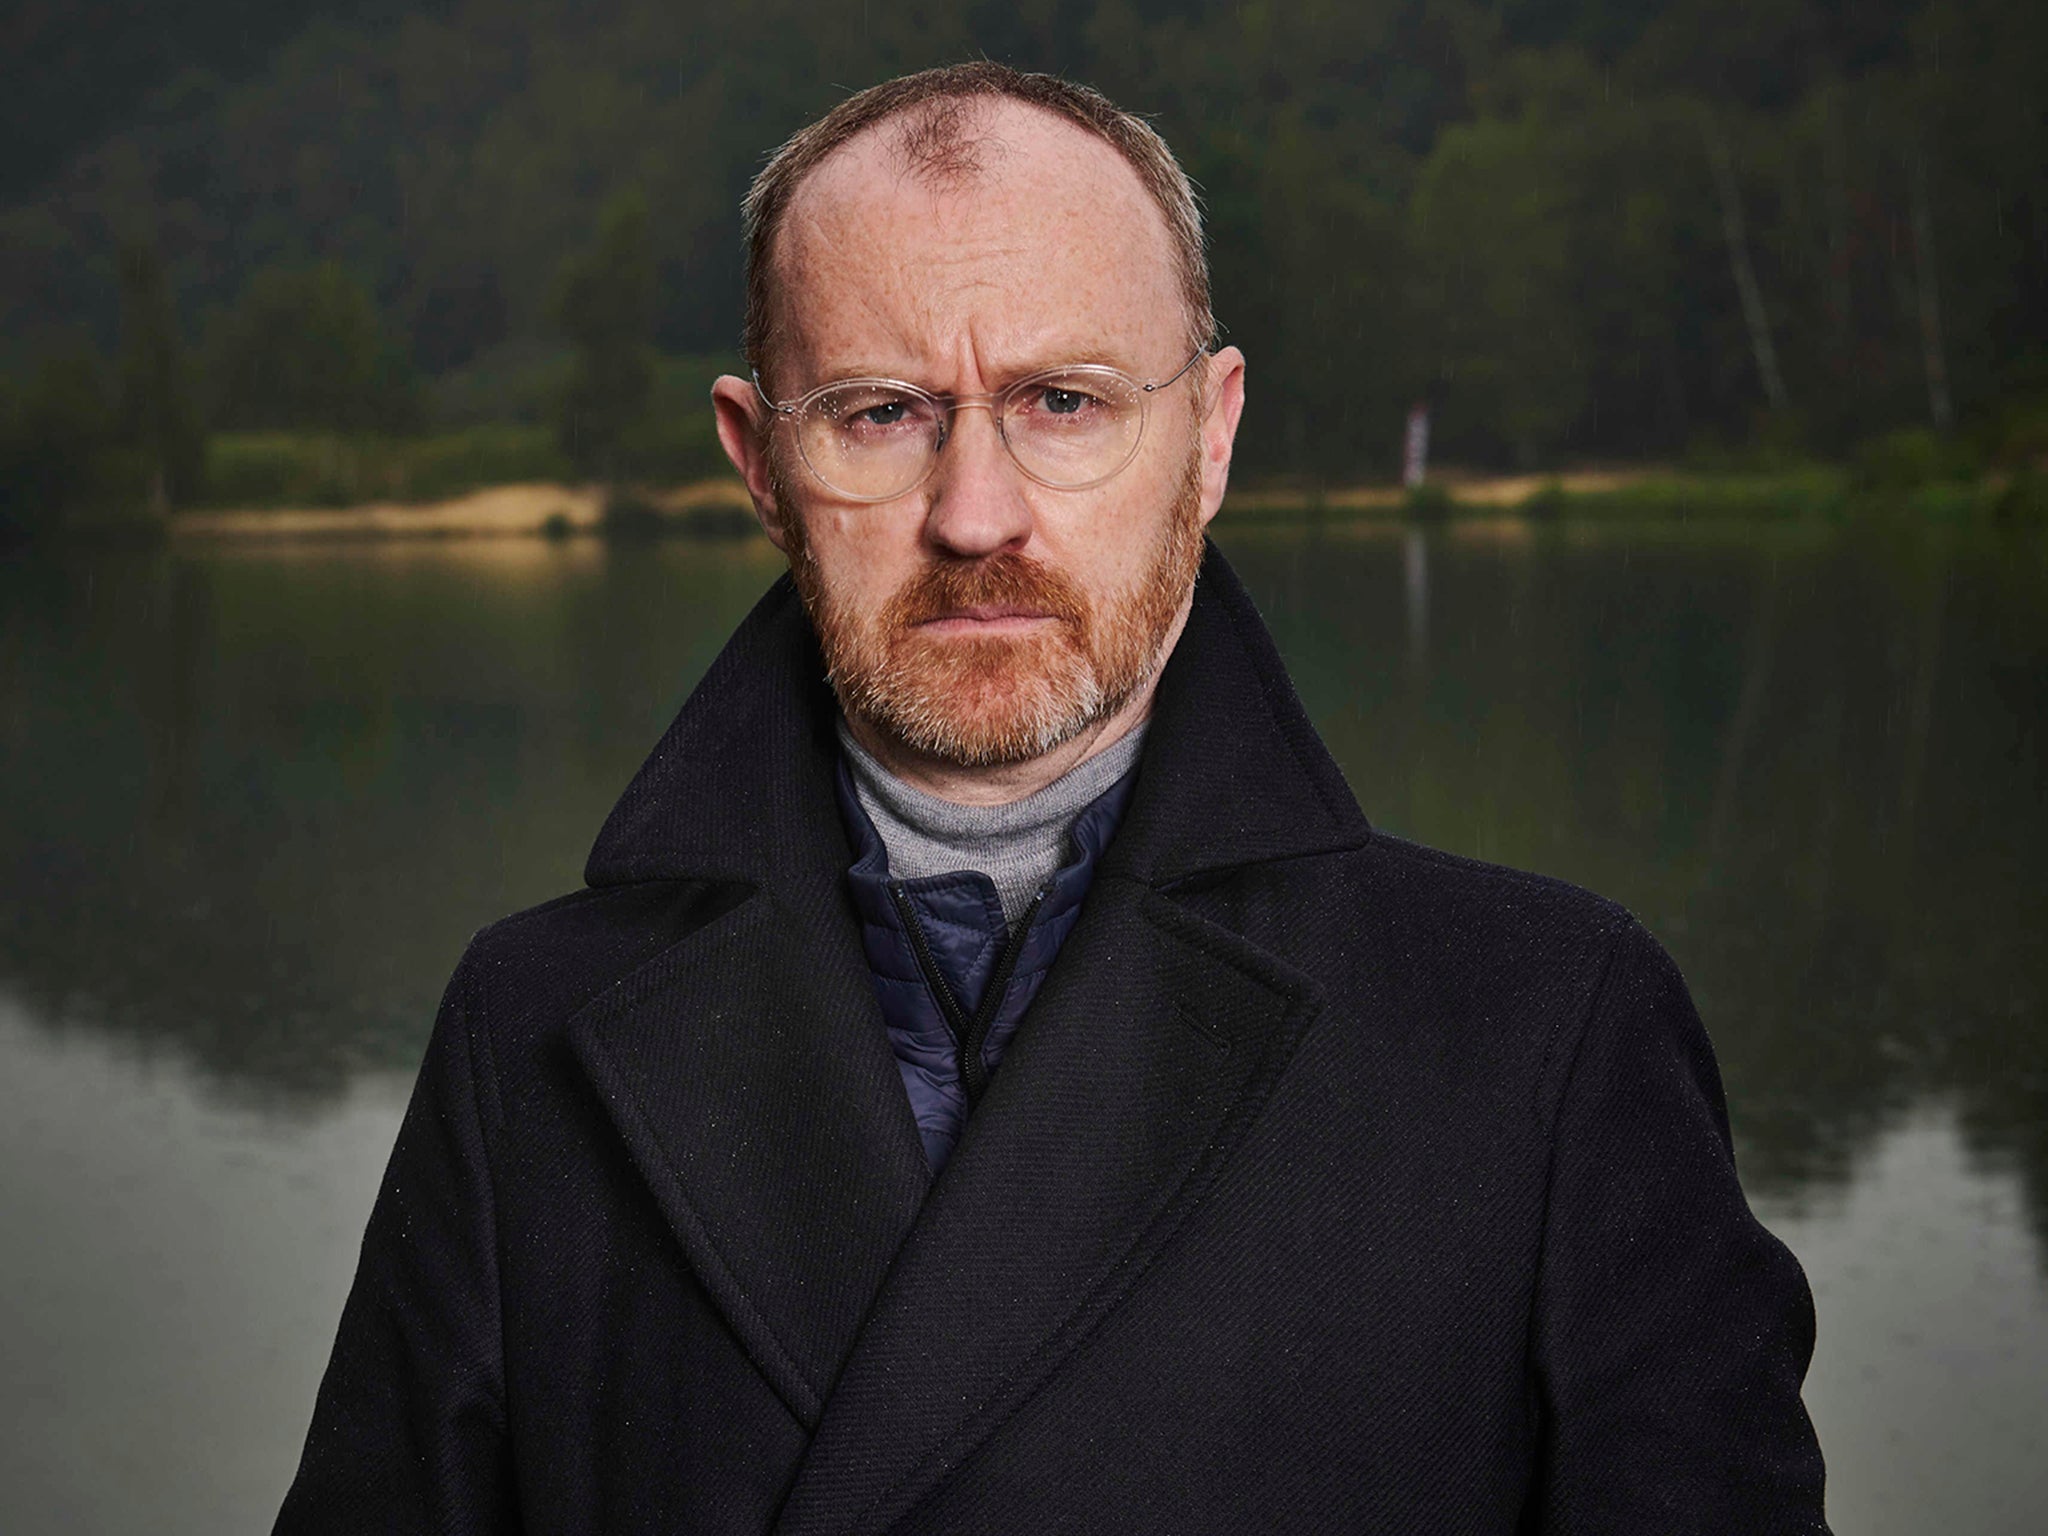 Mark Gatiss is one of our most recognisable TV actors and writers